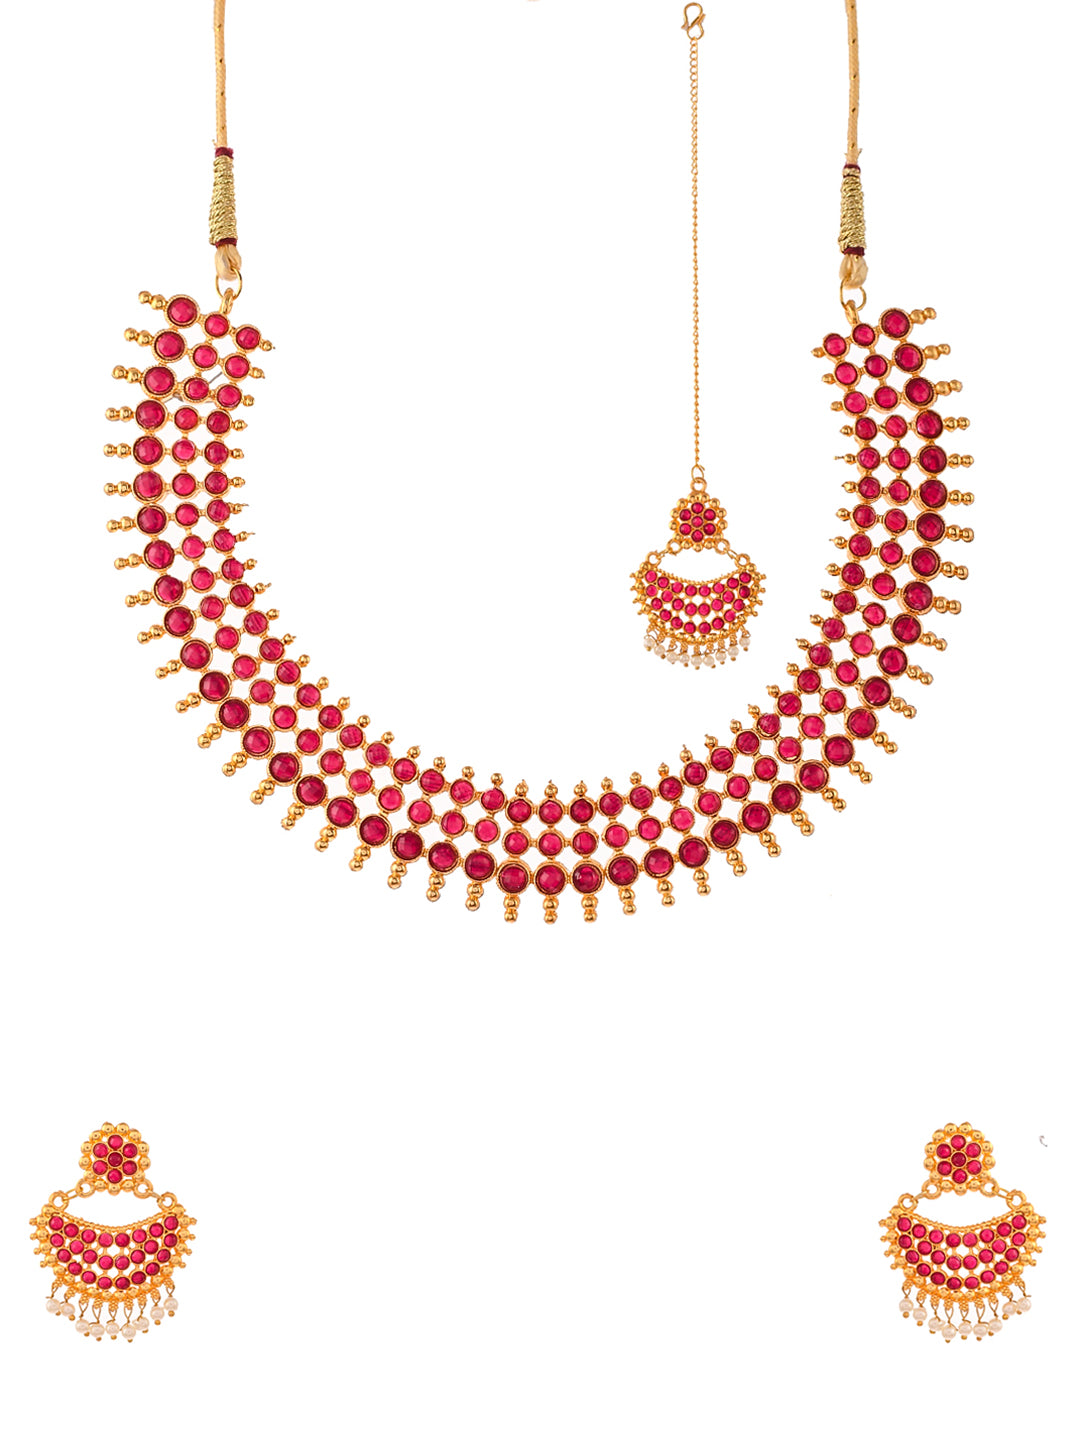 Gold Plated Heavy Bridal Jewellery Set With Maang Tikka